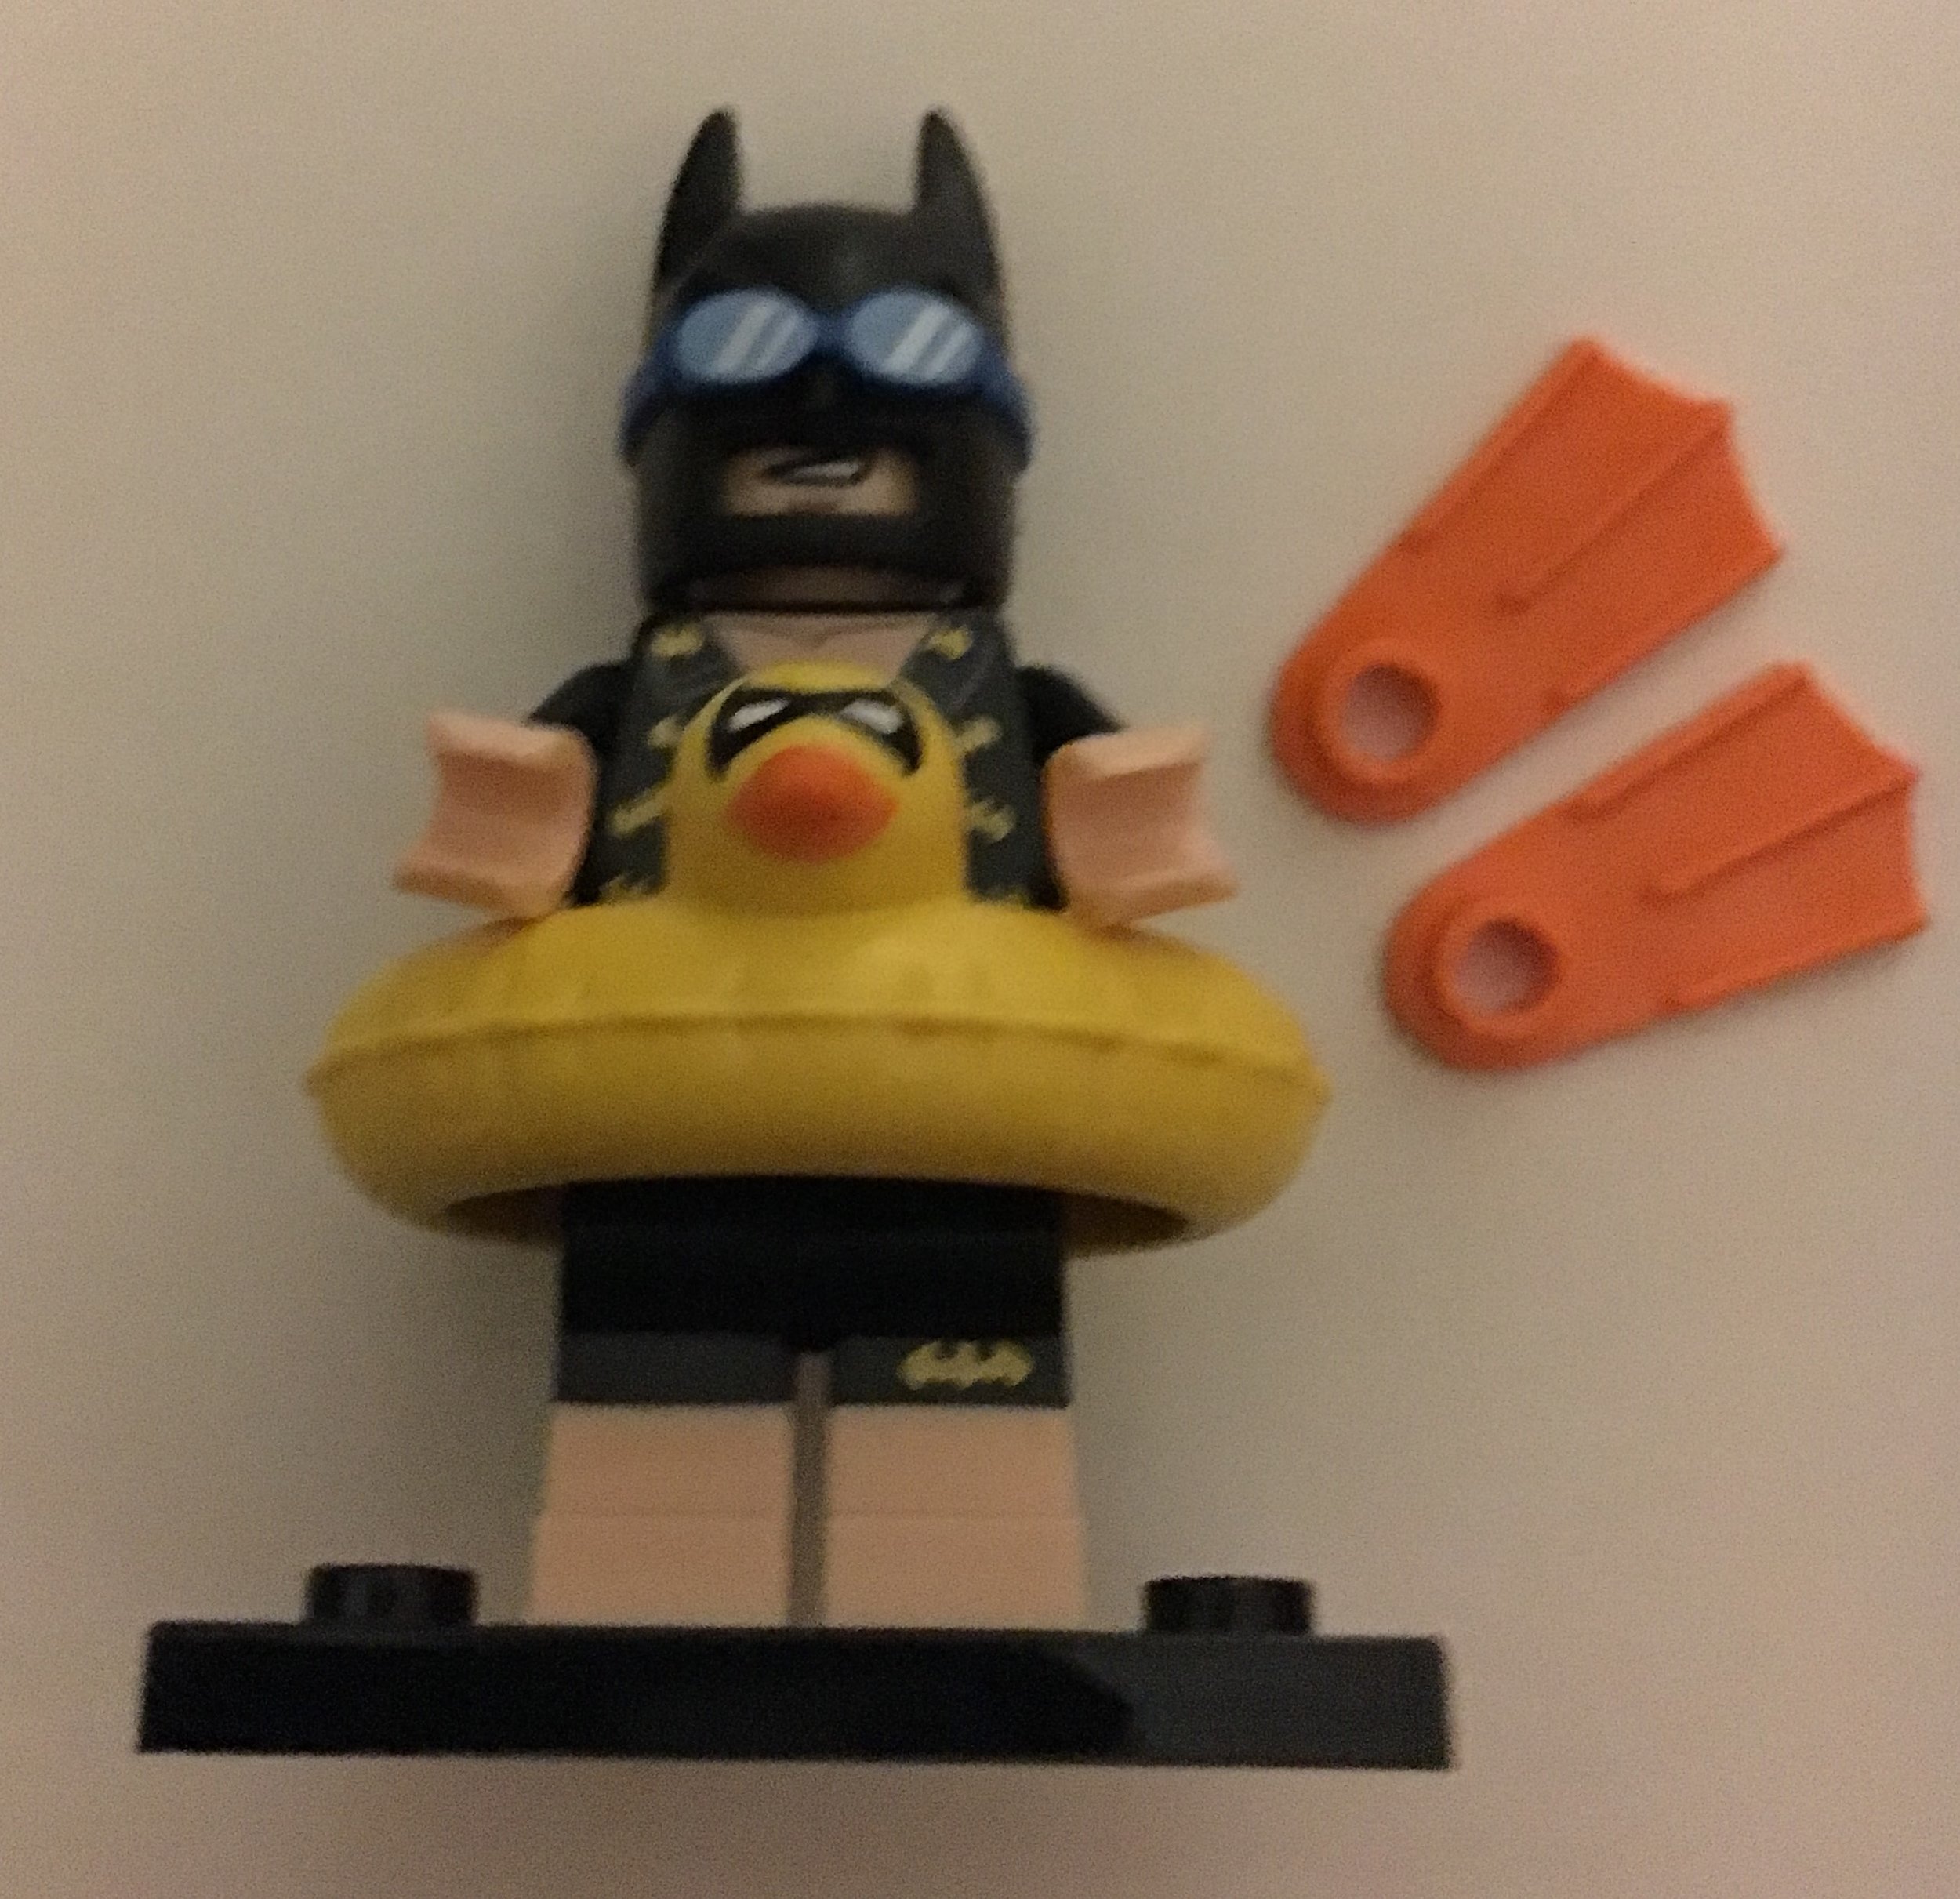 Batman Movie Themed figure and  Mermaid in vacation figure building toy 